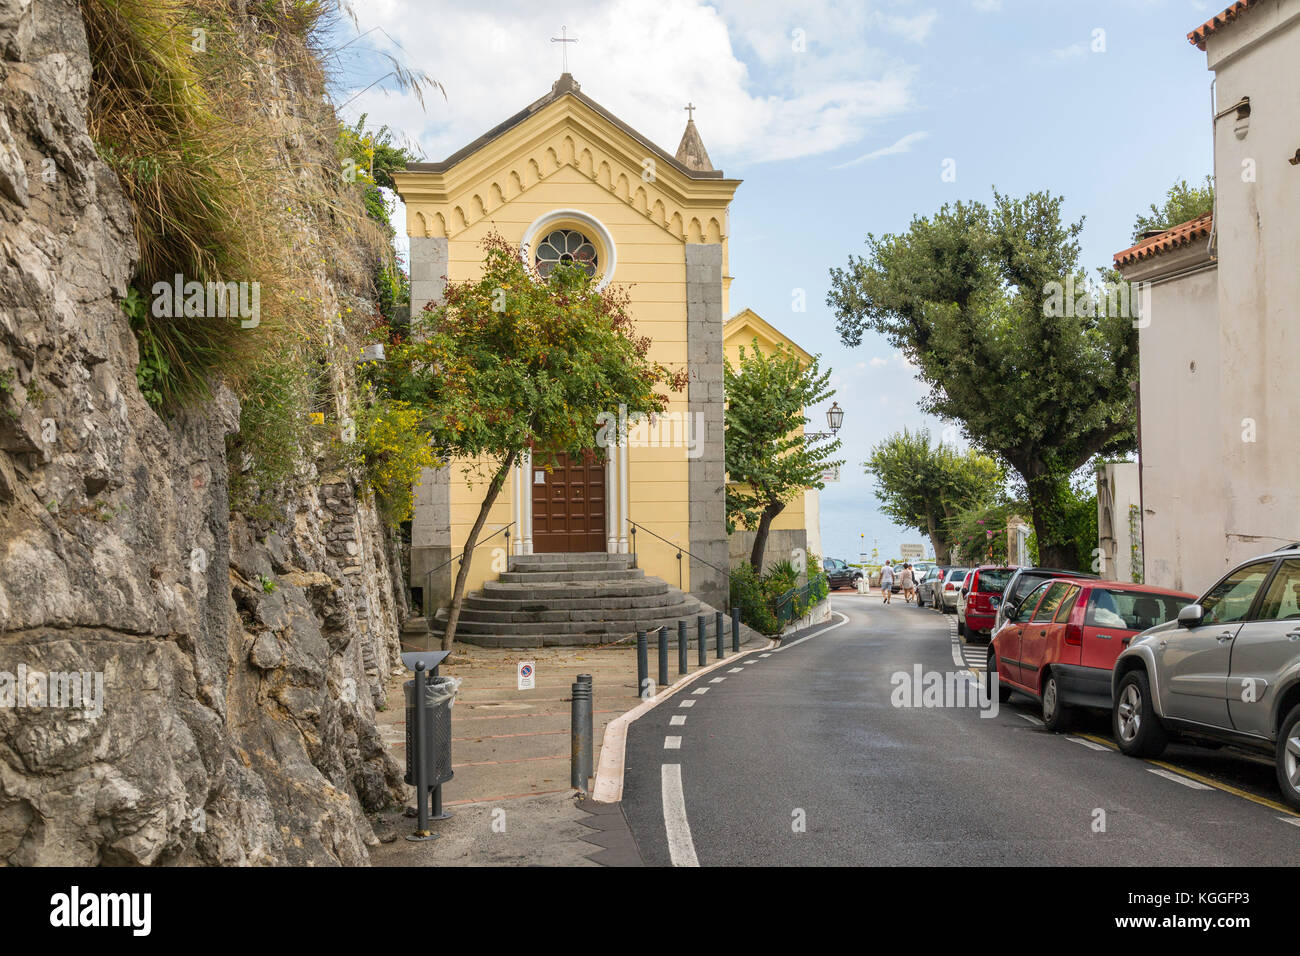 Amalfi coast road going through Positano with a church on one side and cars parked on the other. Stock Photo